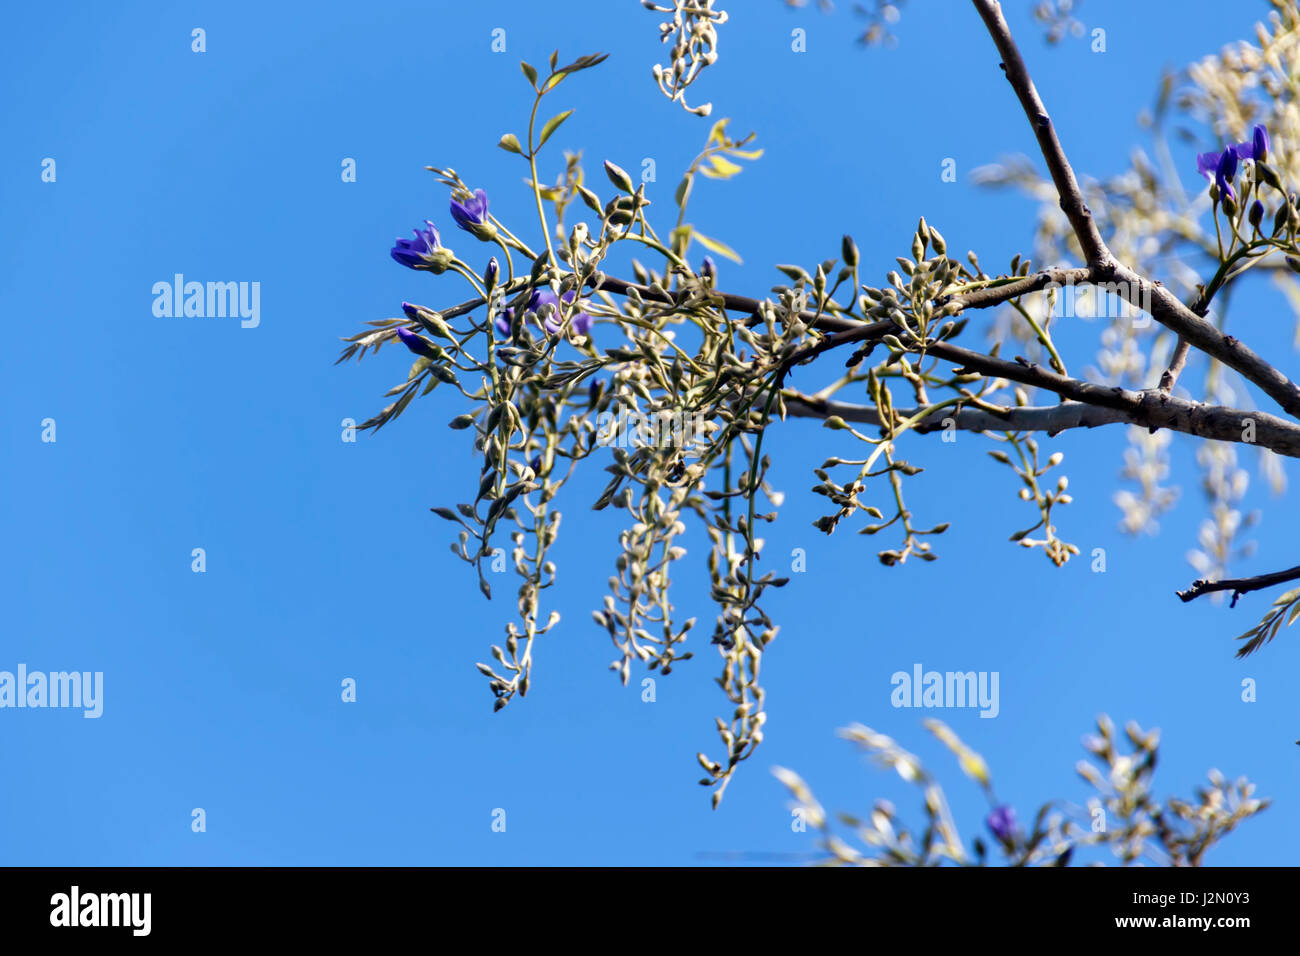 violet flowers on a branch Stock Photo